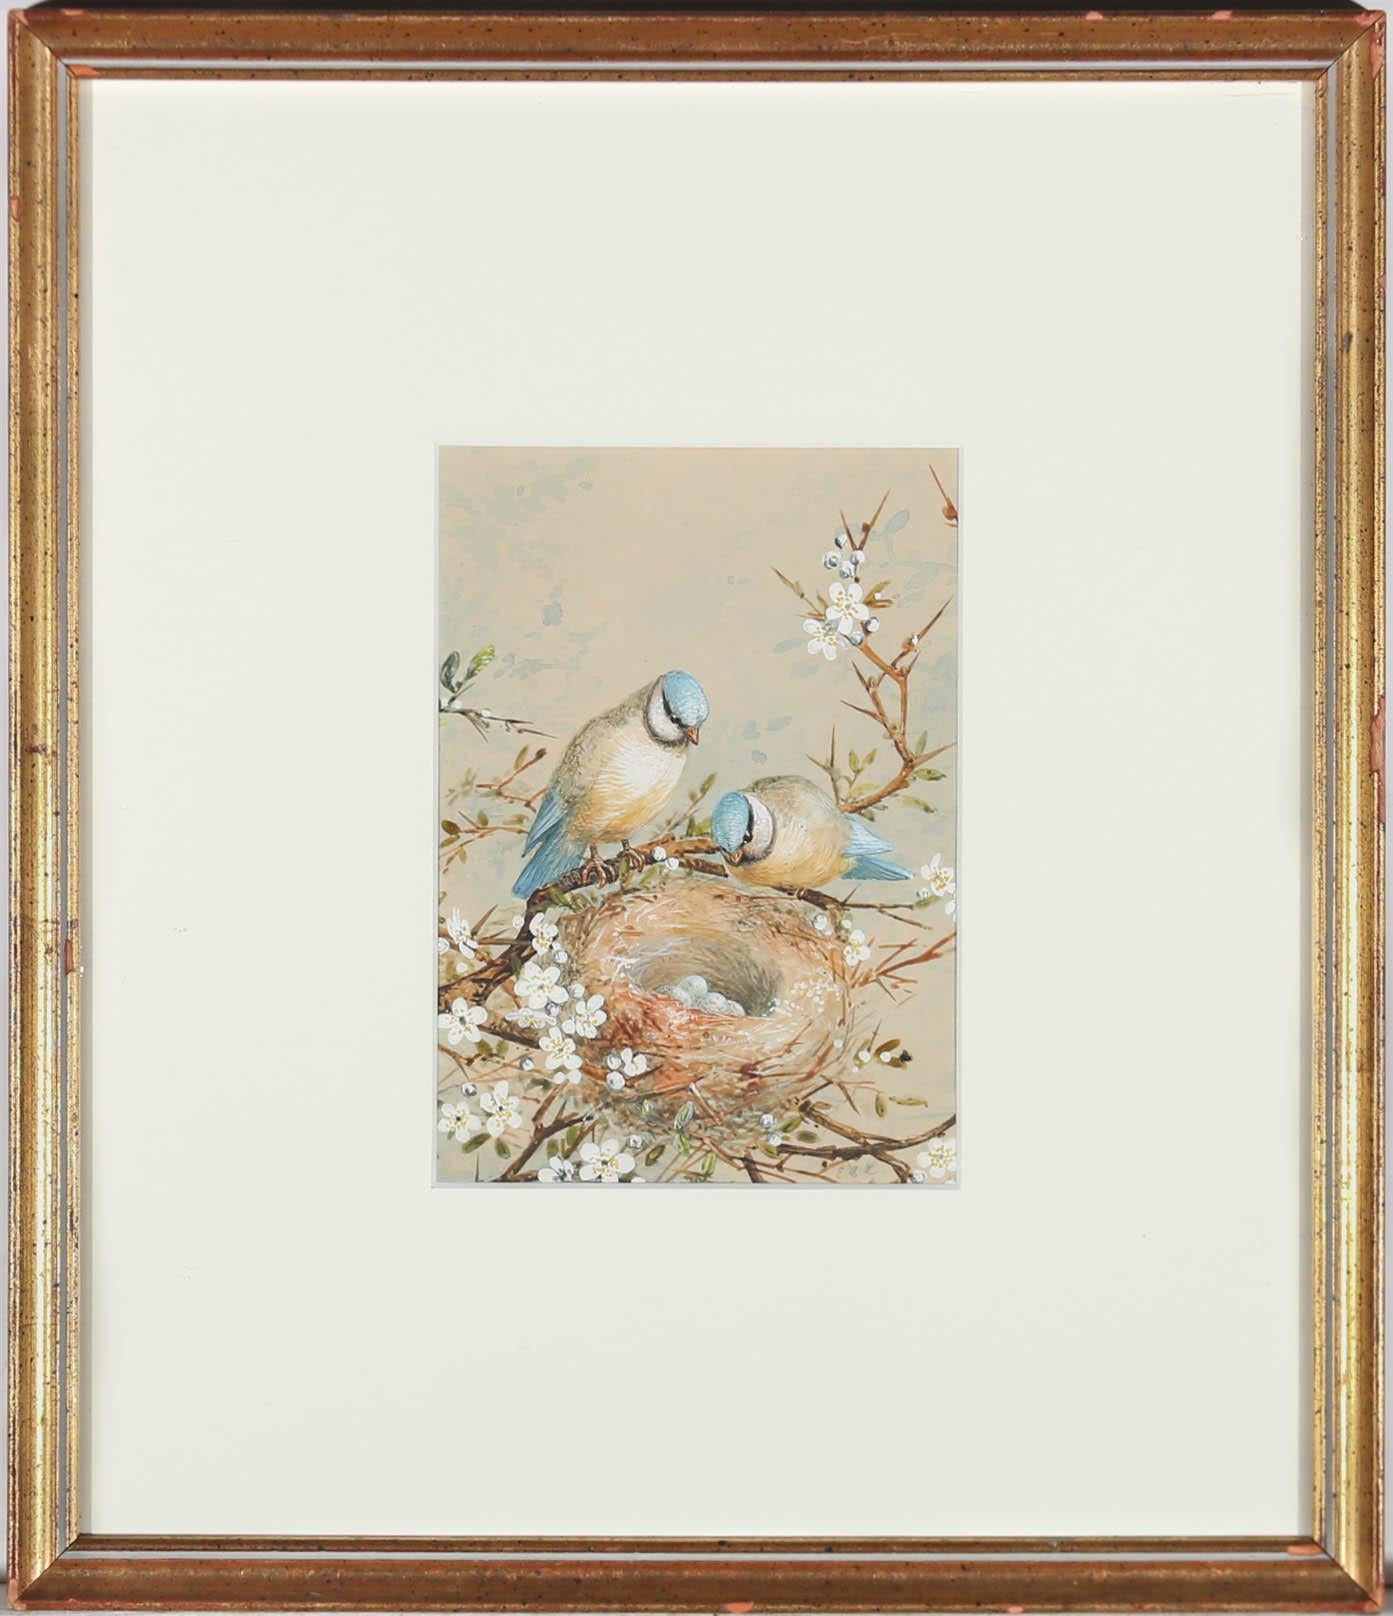 This exquisite watercolour depicts an engaging study of two blue tits, perched over a fragile nest of eggs. Barbed hawthorn and scent blossom ties the scene together with gentle touches of body colour picked up in the birds plumage and delicate